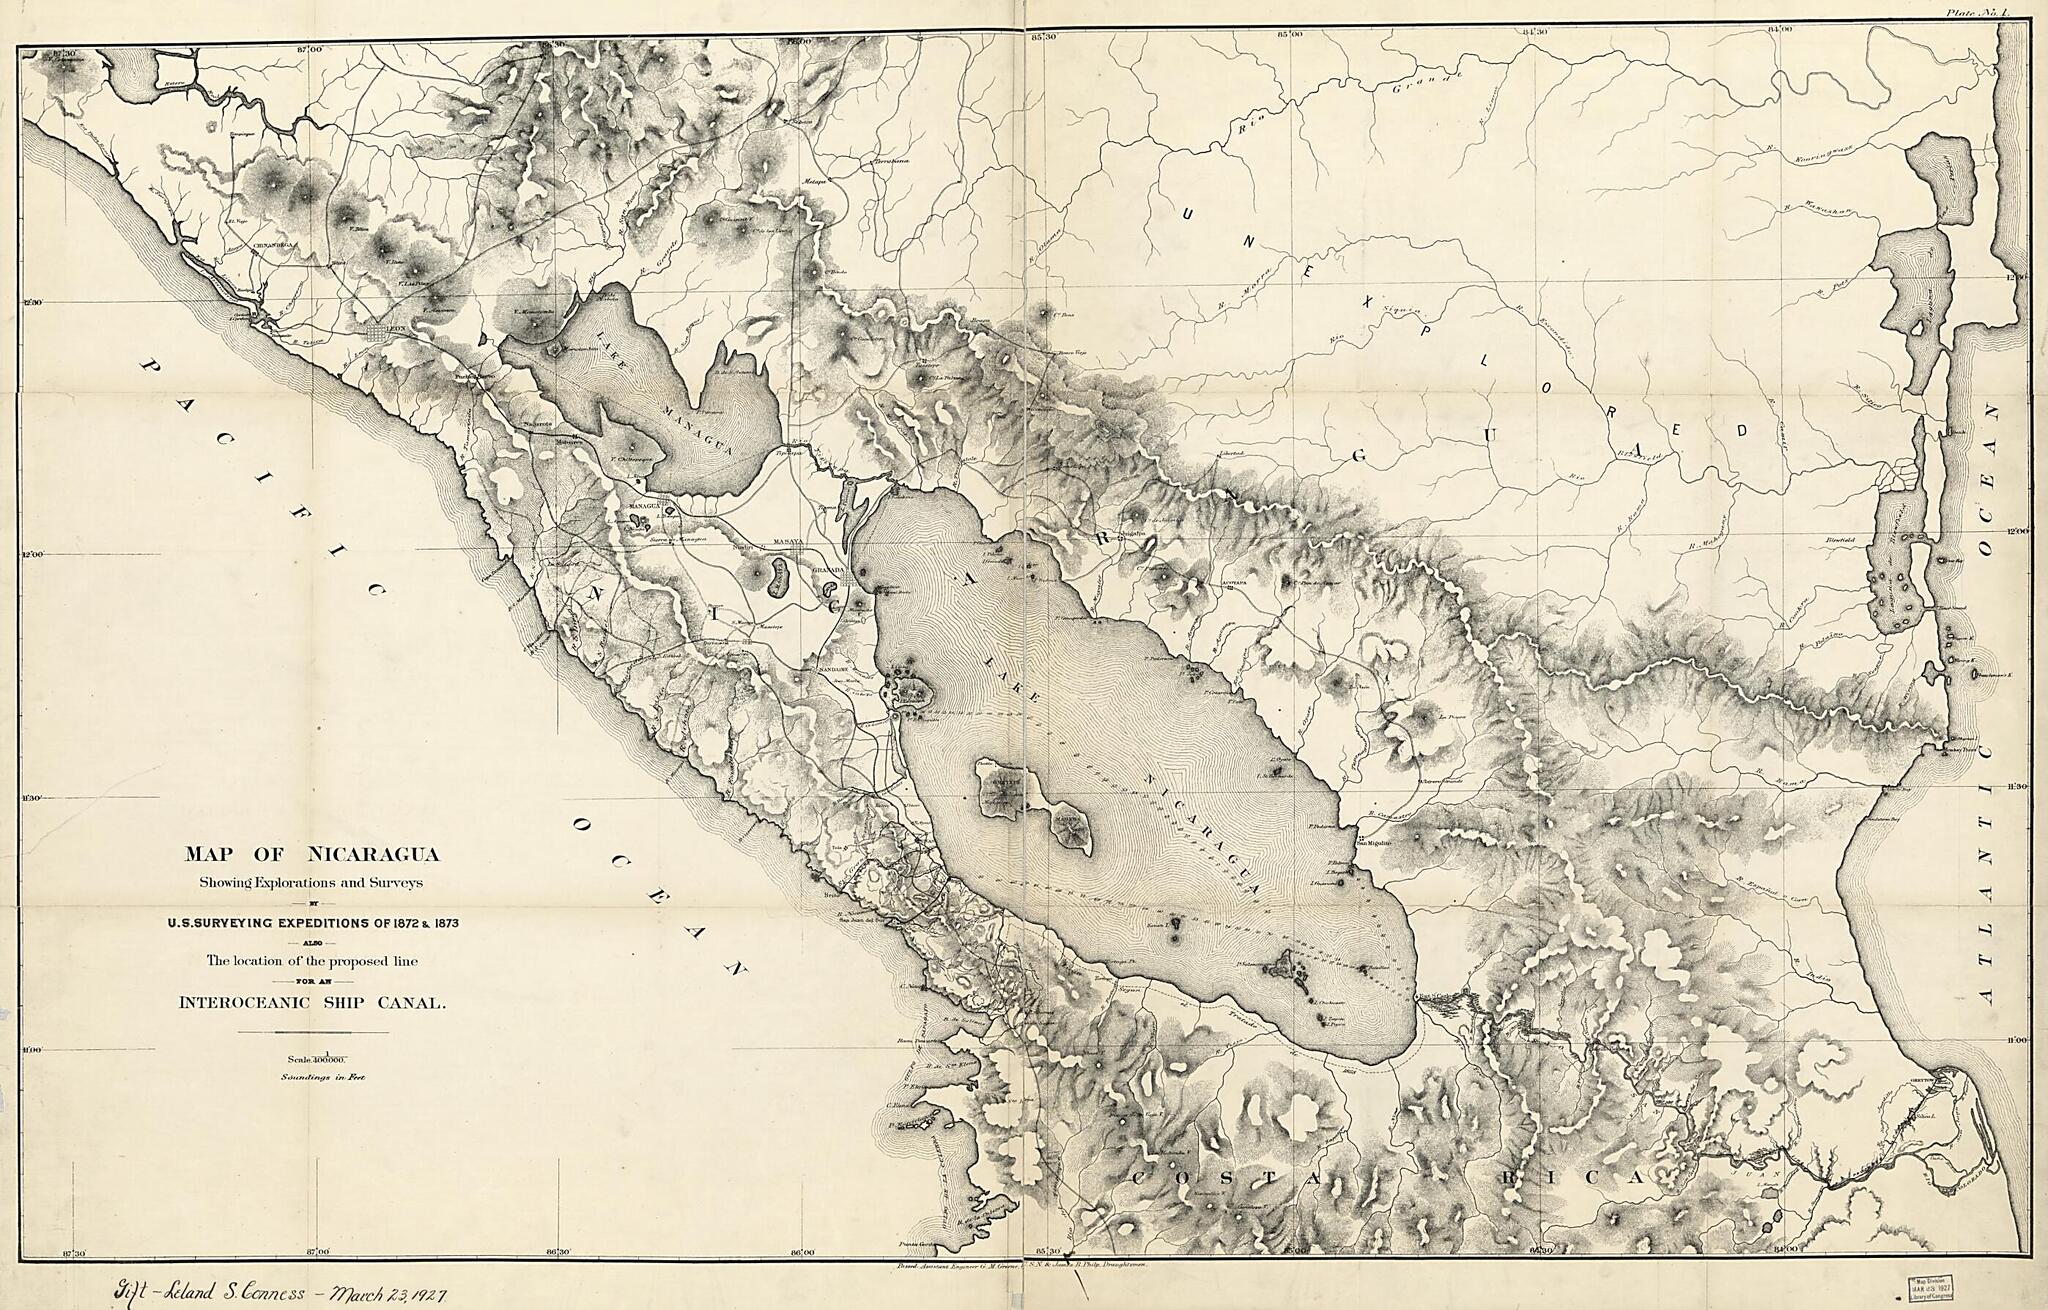 This old map of Map of Nicaragua : Showing Explorations and Surveys : Also the Location of the Proposed Line for an Interoceanic Ship Canal from 1872 was created by J. B. (James B.) Philp in 1872